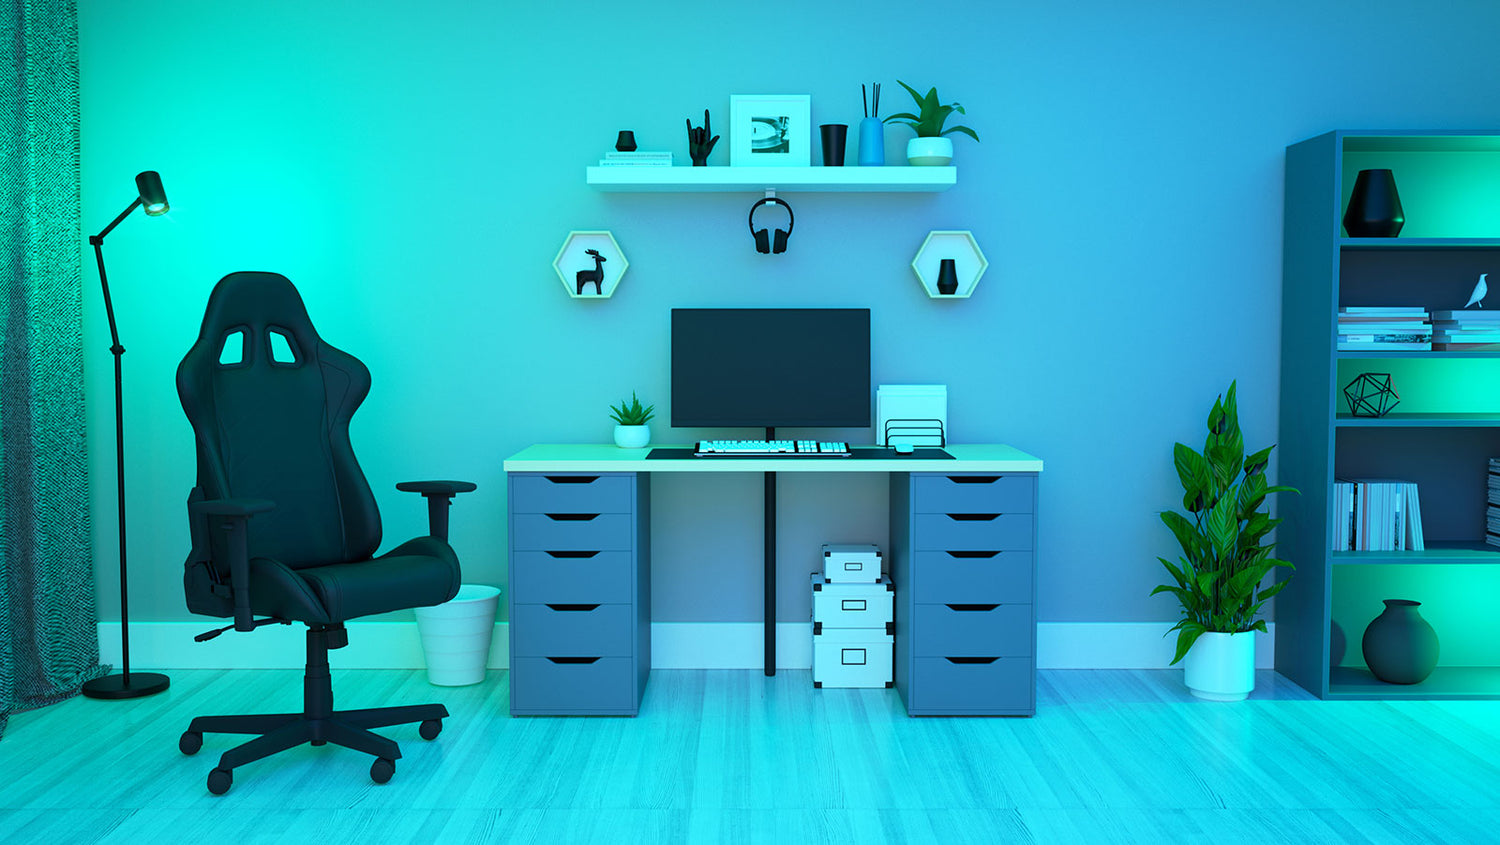 Blue color light in a office